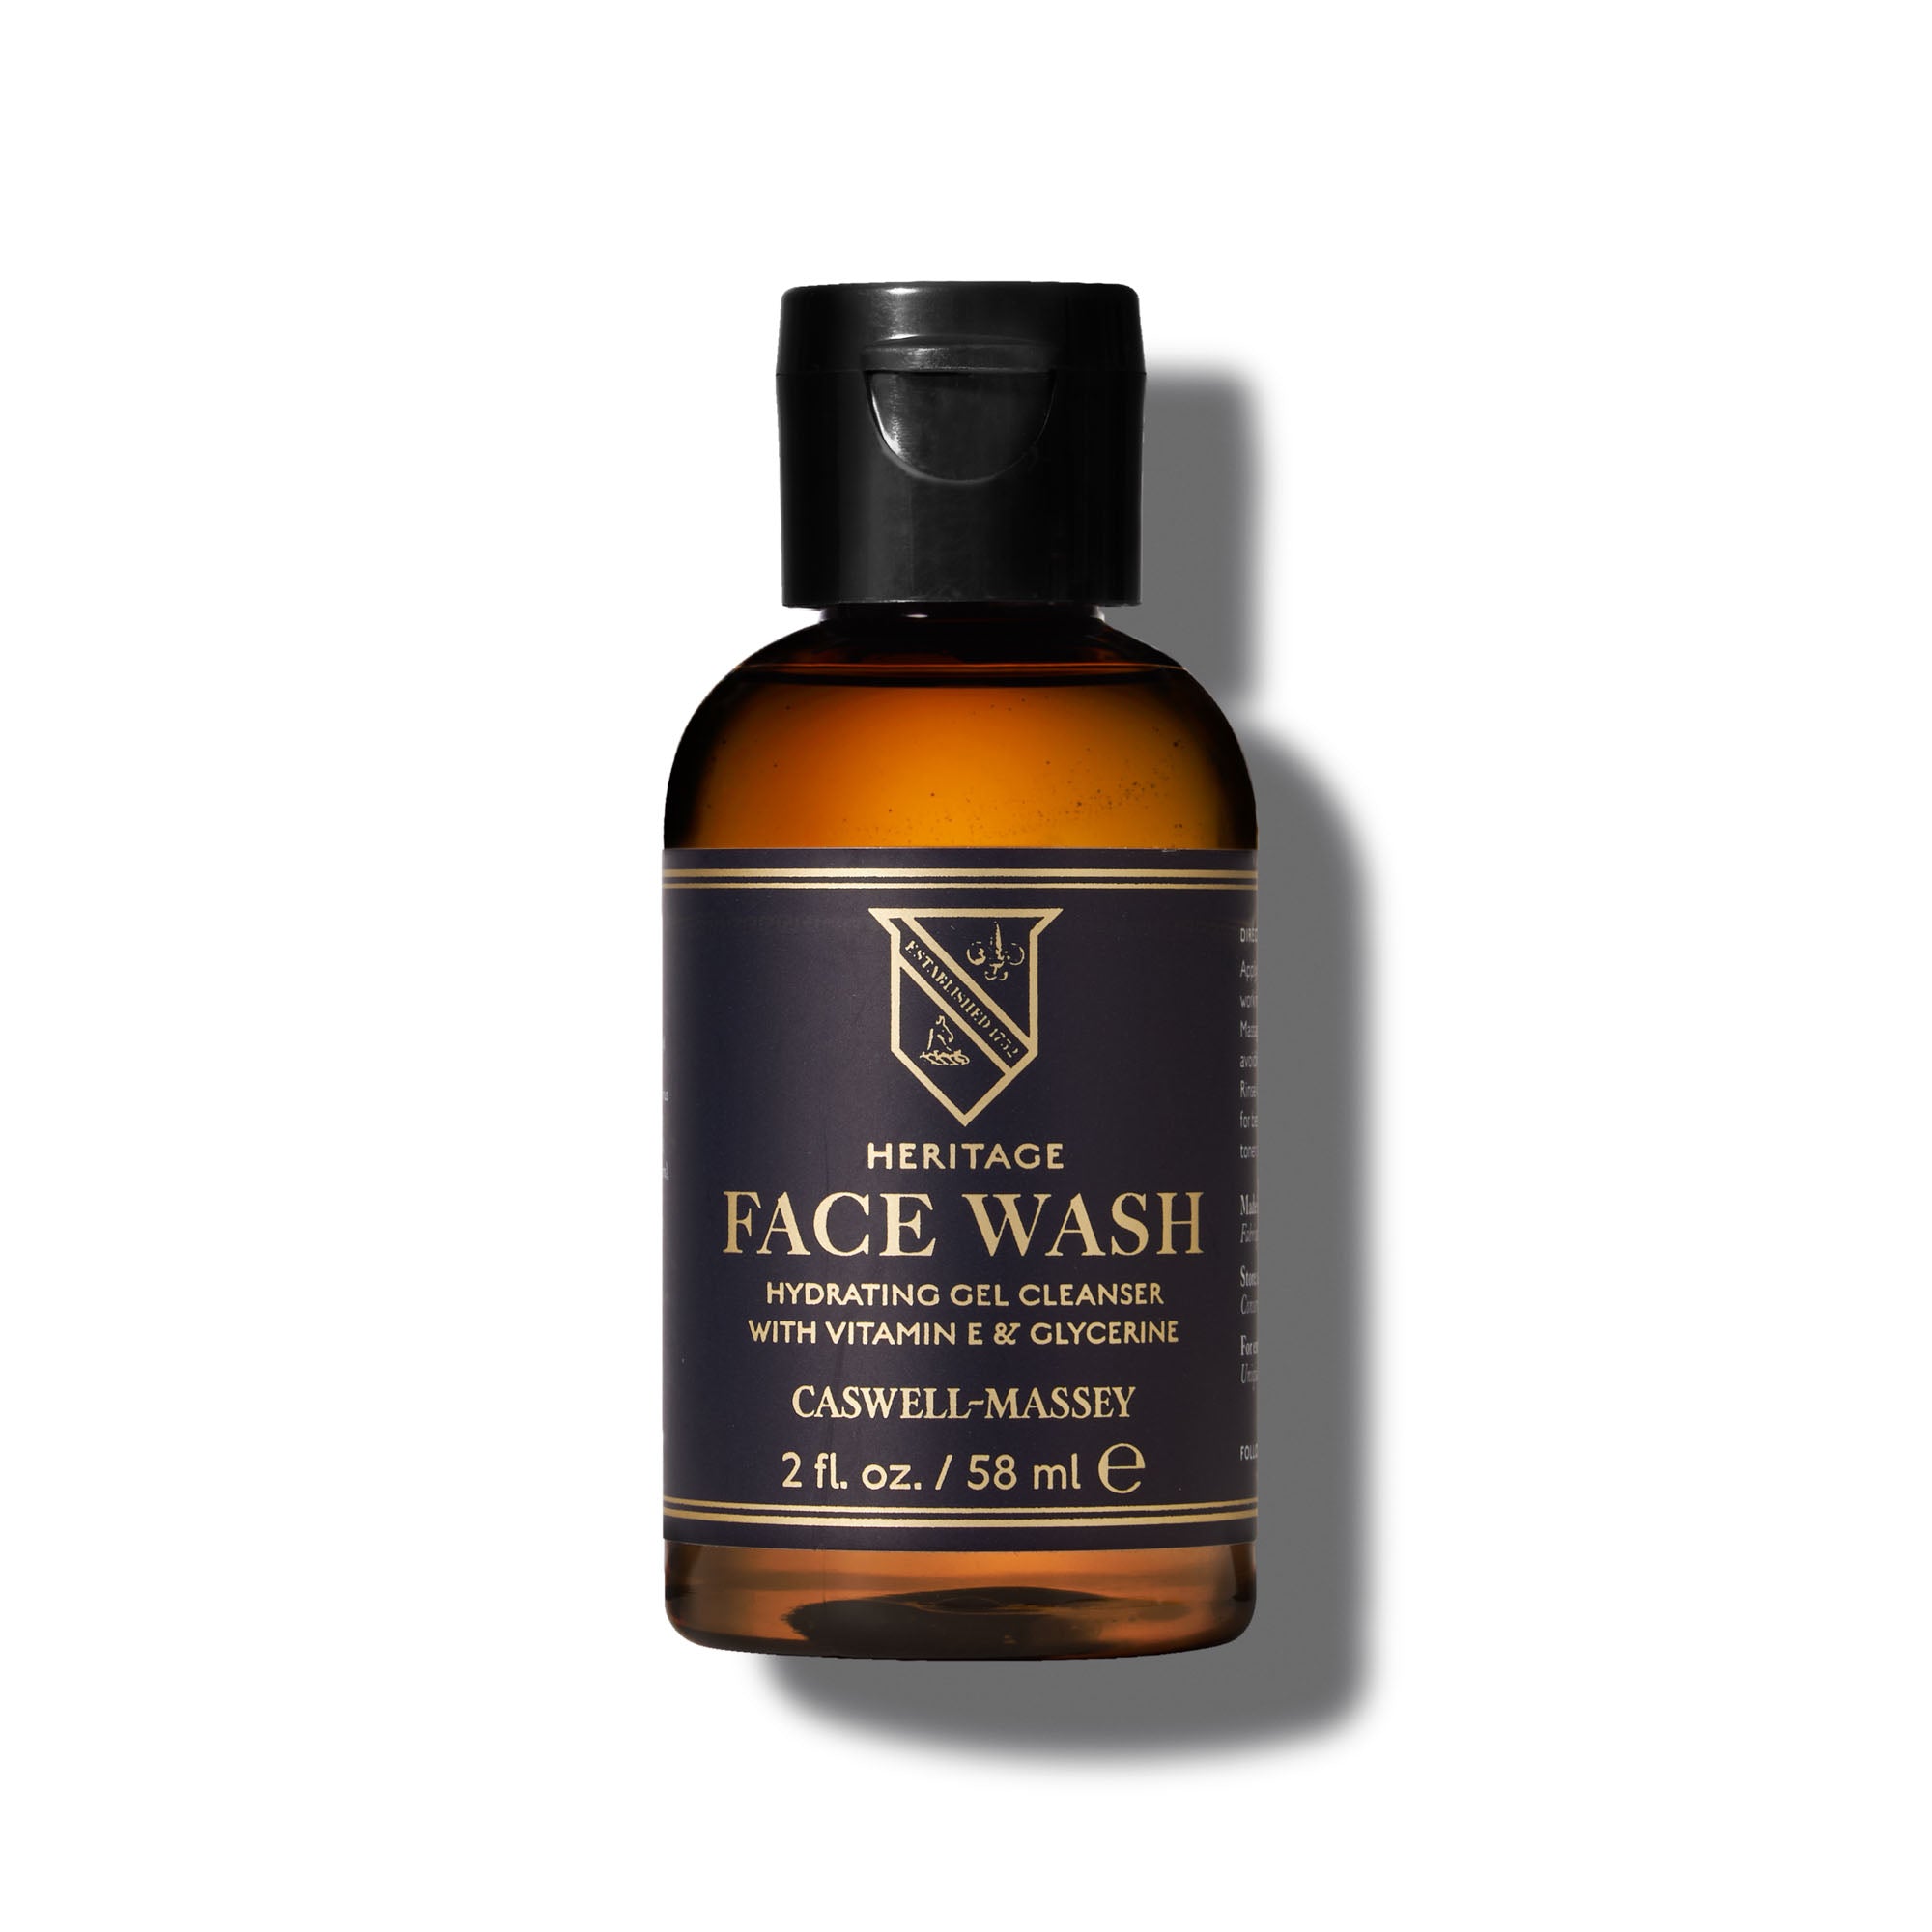 Caswell-Massey Hydrating, Cleansing Heritage Face Wash, 2oz travel size